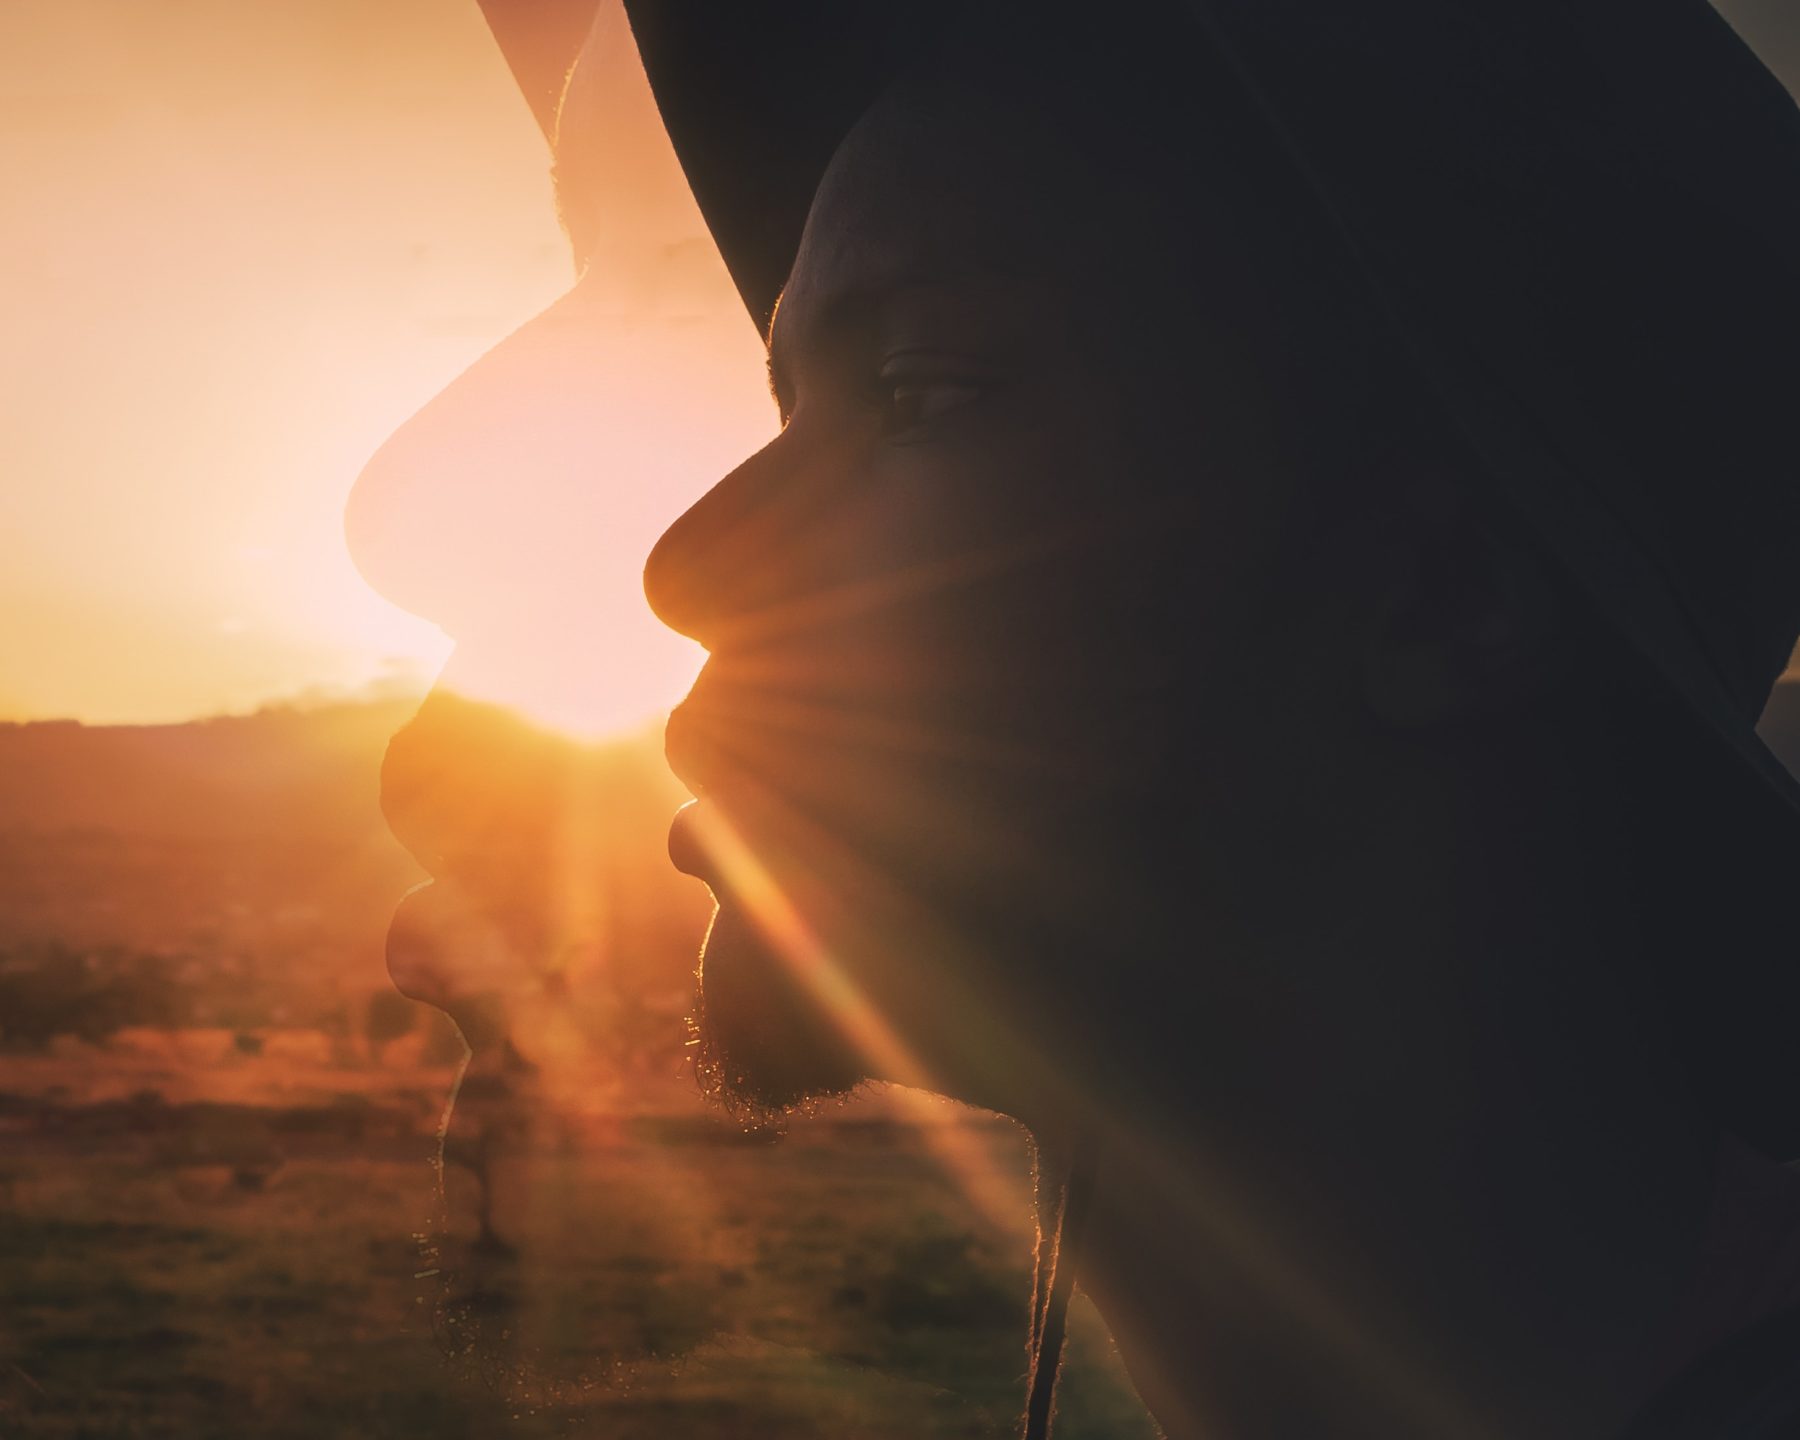 A portrait of a young, Kenyan man wearing a hat with the sun setting in the background.